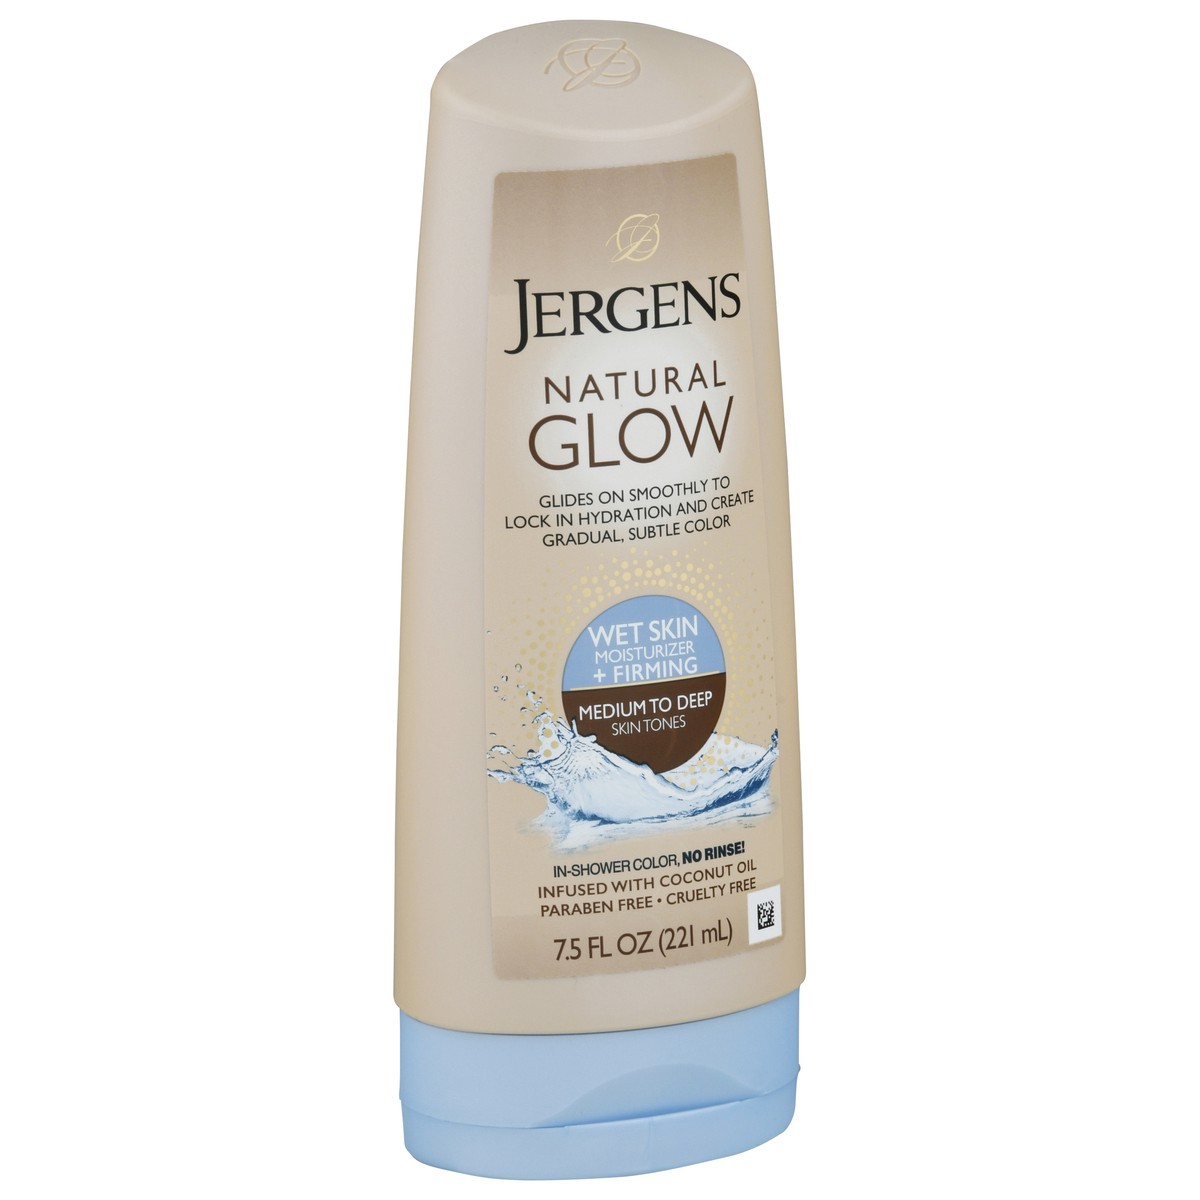 slide 3 of 9, Jergens Natural Glow +FIRMING In-shower Sunless Tanning Lotion, Self Tanner for Medium to Deep Skin Tone, Anti Cellulite Firming Body Lotion, for Gradual and Natural-Looking Fake Tan, 7.5 Ounce, 7.50 fl oz